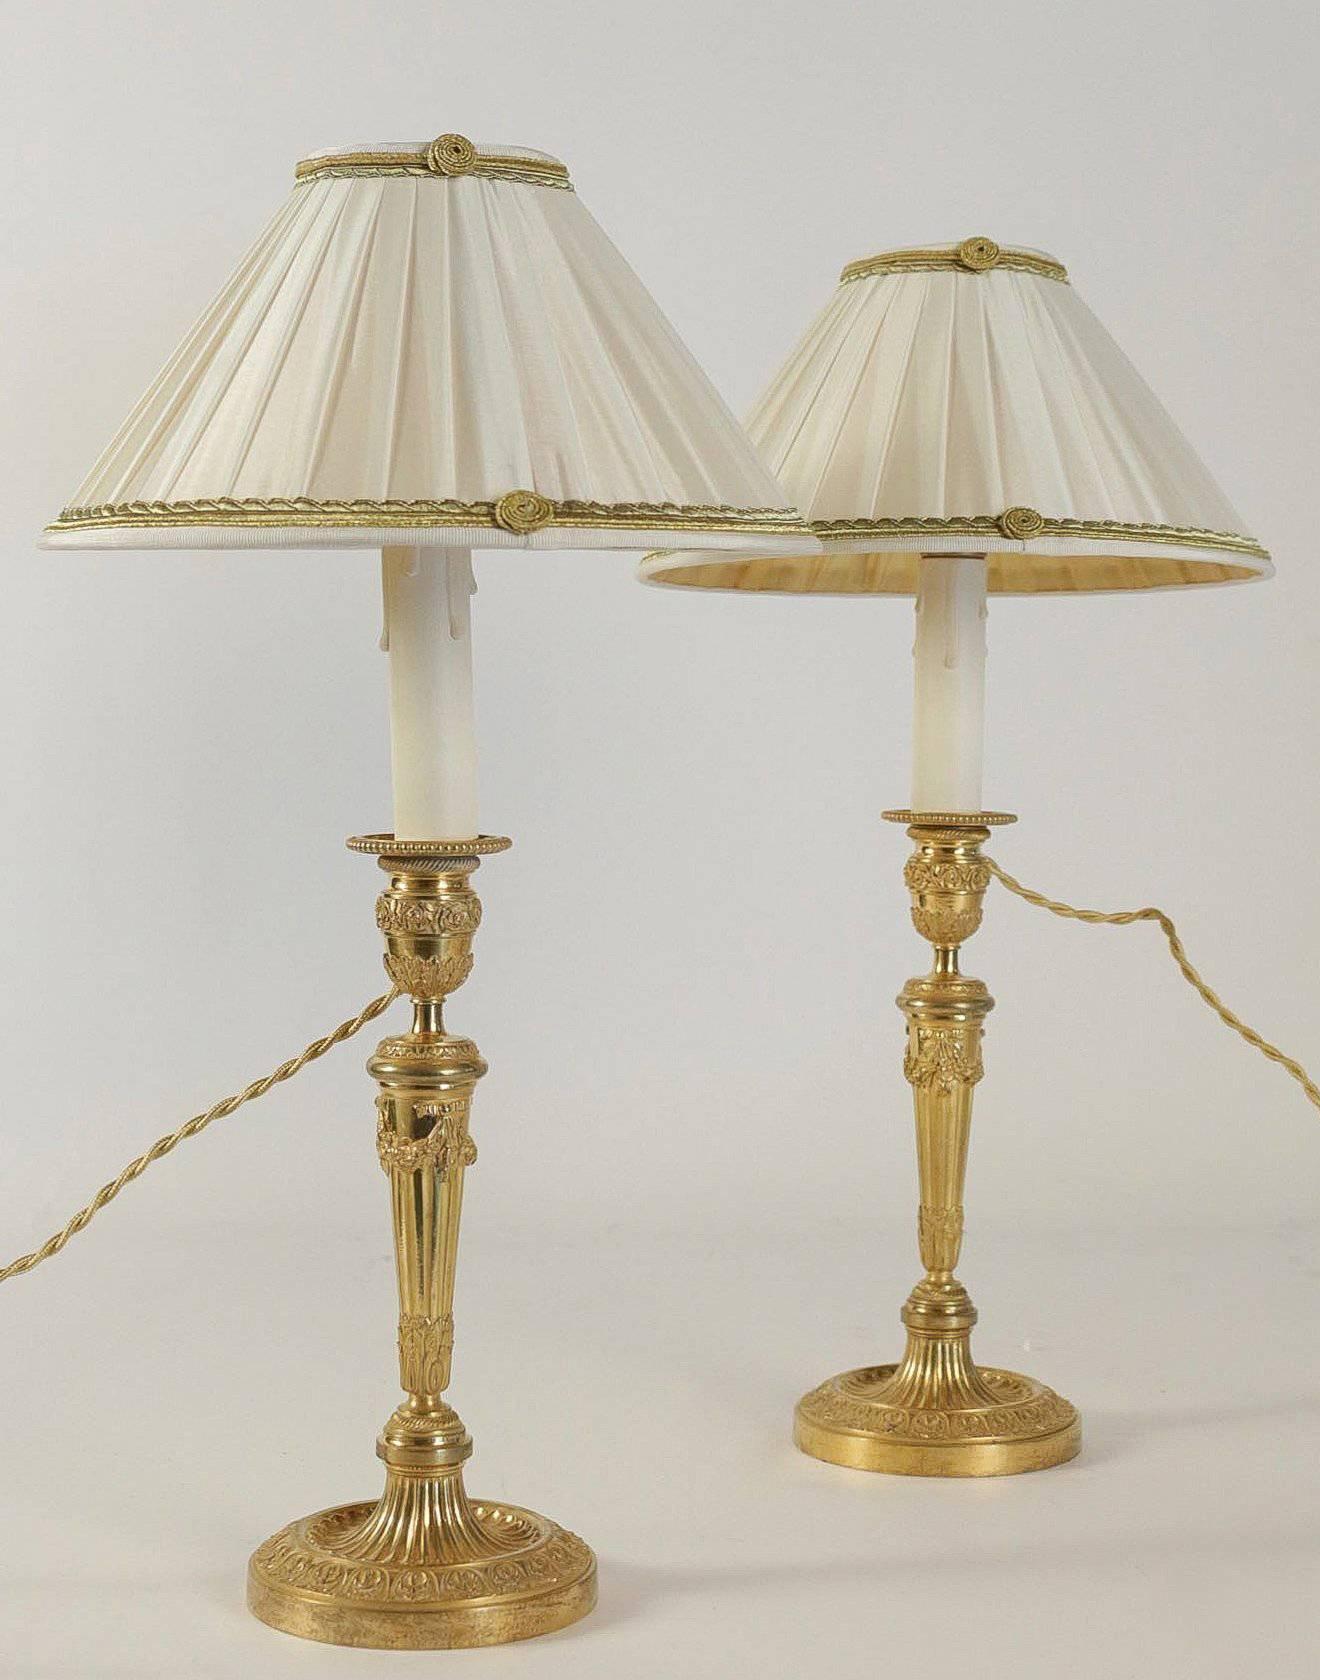 Pair of French Louis XVI Style Mercure Gilt-Bronze Candlestick Lamps, circa 1820 4